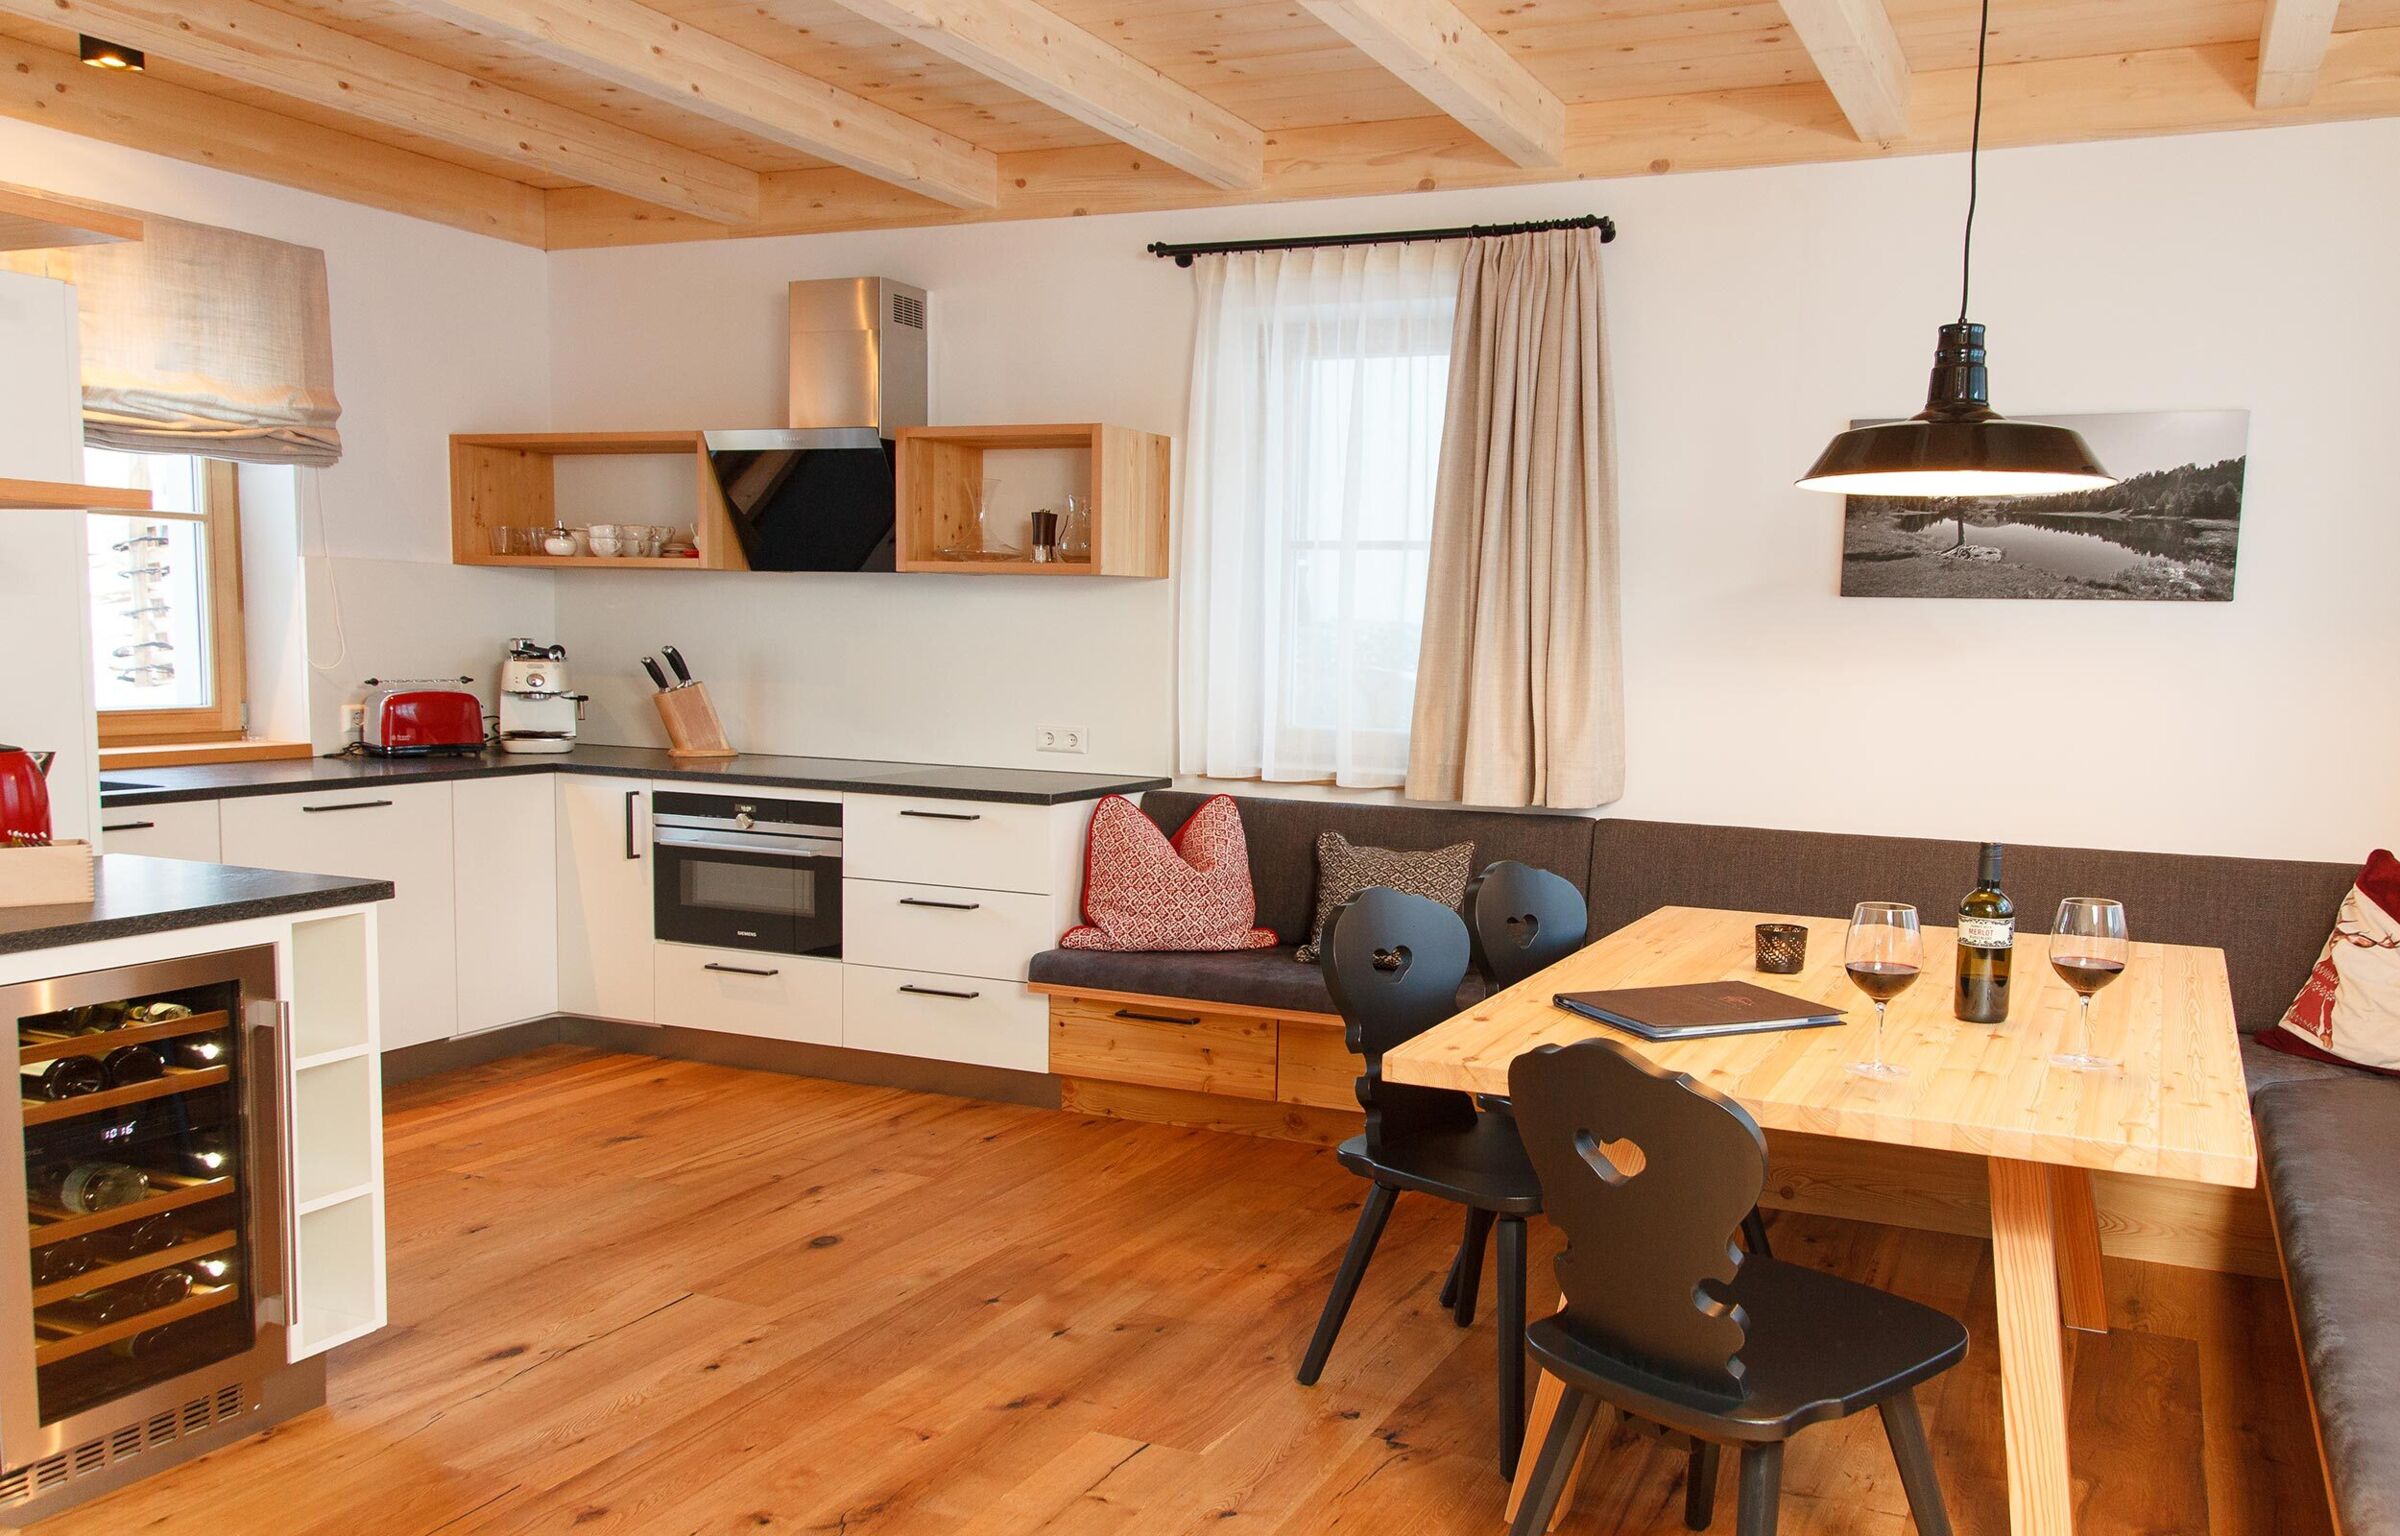 Modern and large kitchen and dining area in the Trattlers Hof chalets in Carinthia